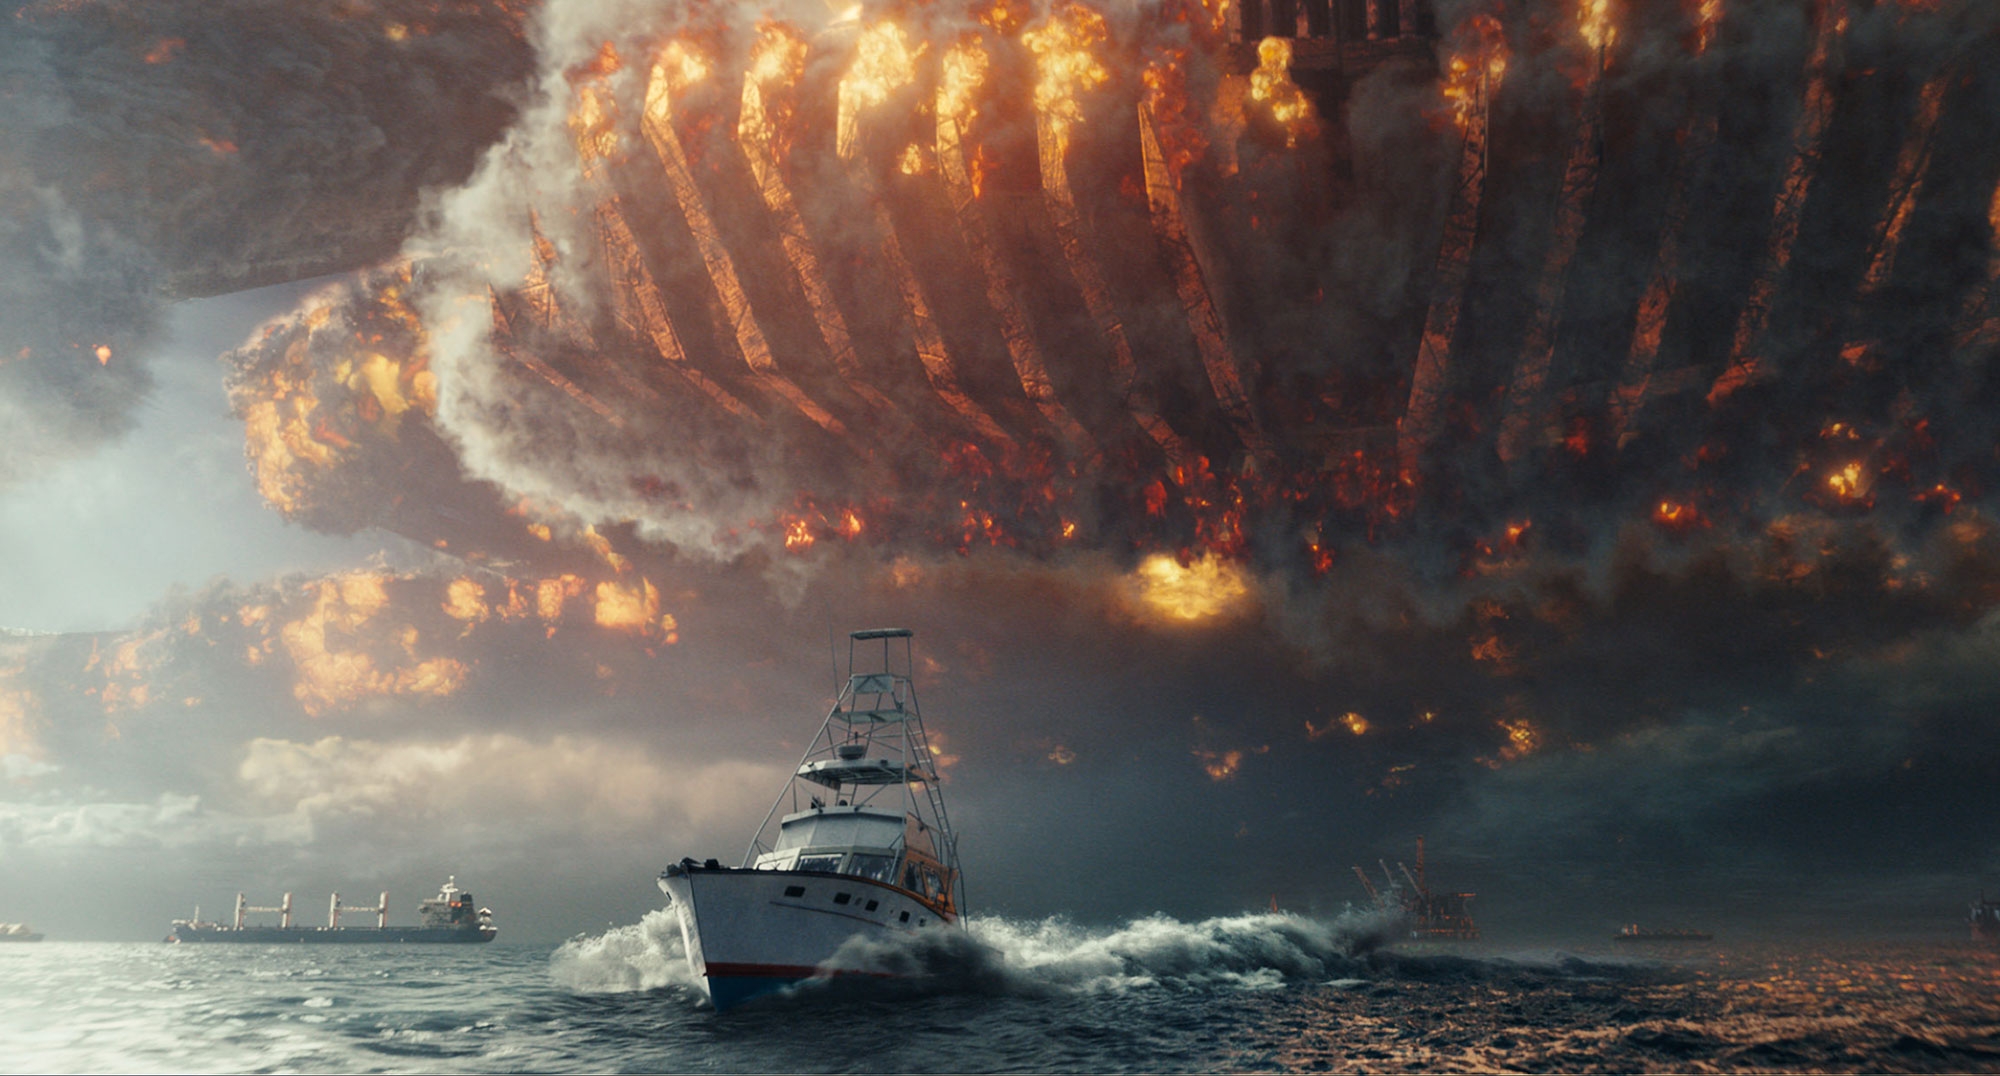 Independence Day: Resurgence is downright crazy